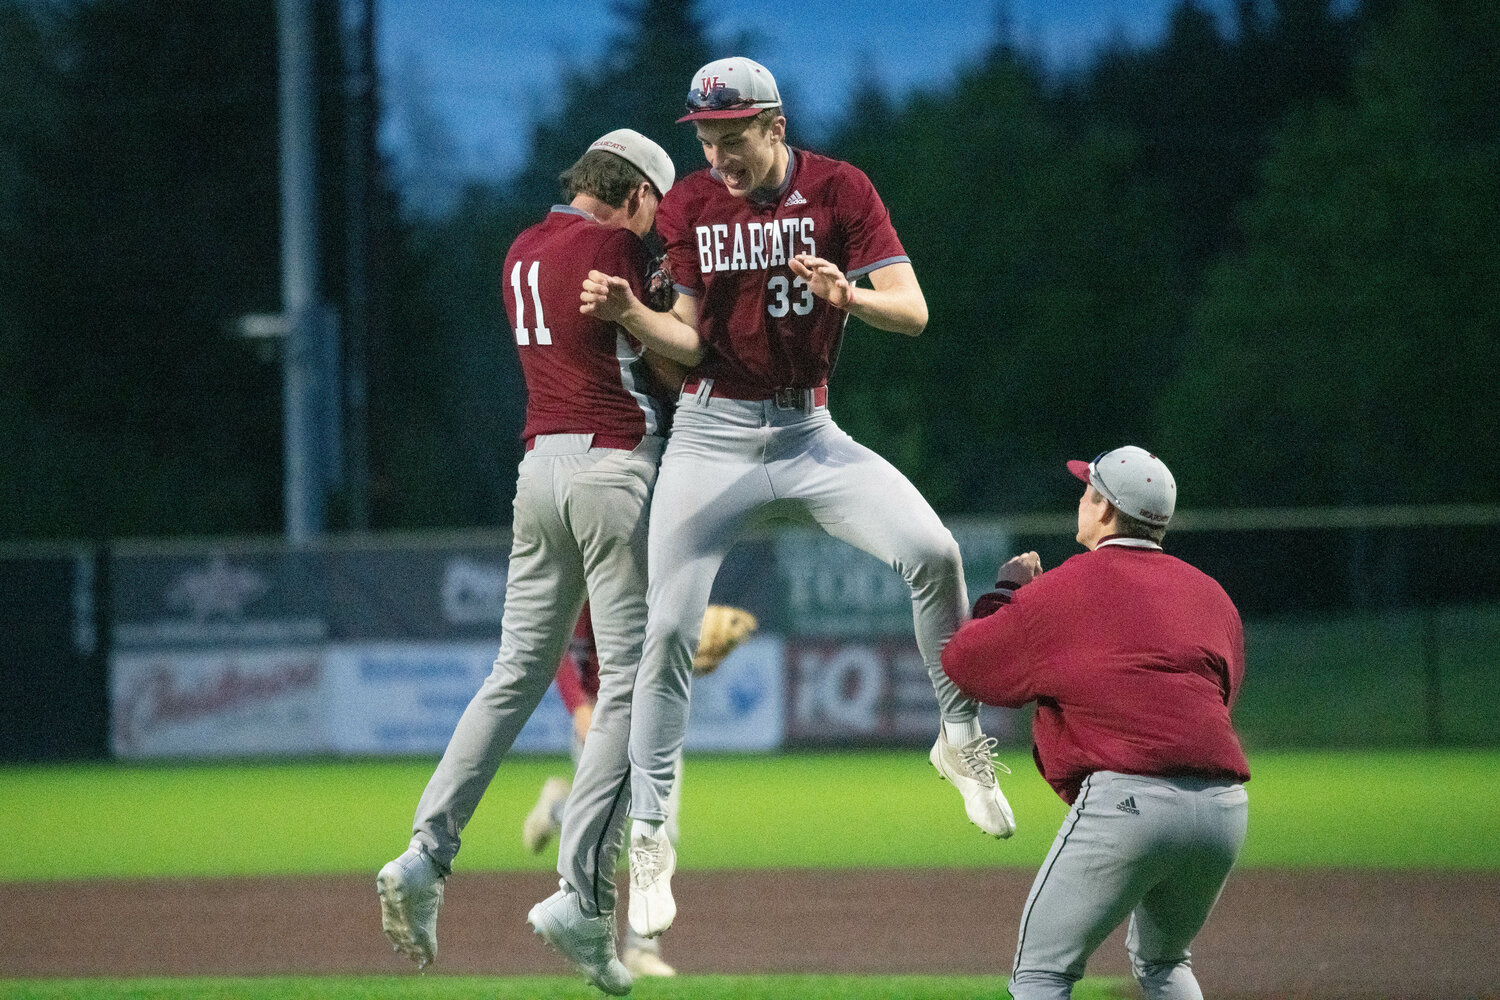 Riggs Westlund (11) and Grady Westlund (33) celebrate after the final out of W.F. West's 9-0 win over Ridgefield in the 2A District 4 Tournament semifinals, May 10 at the RORC.